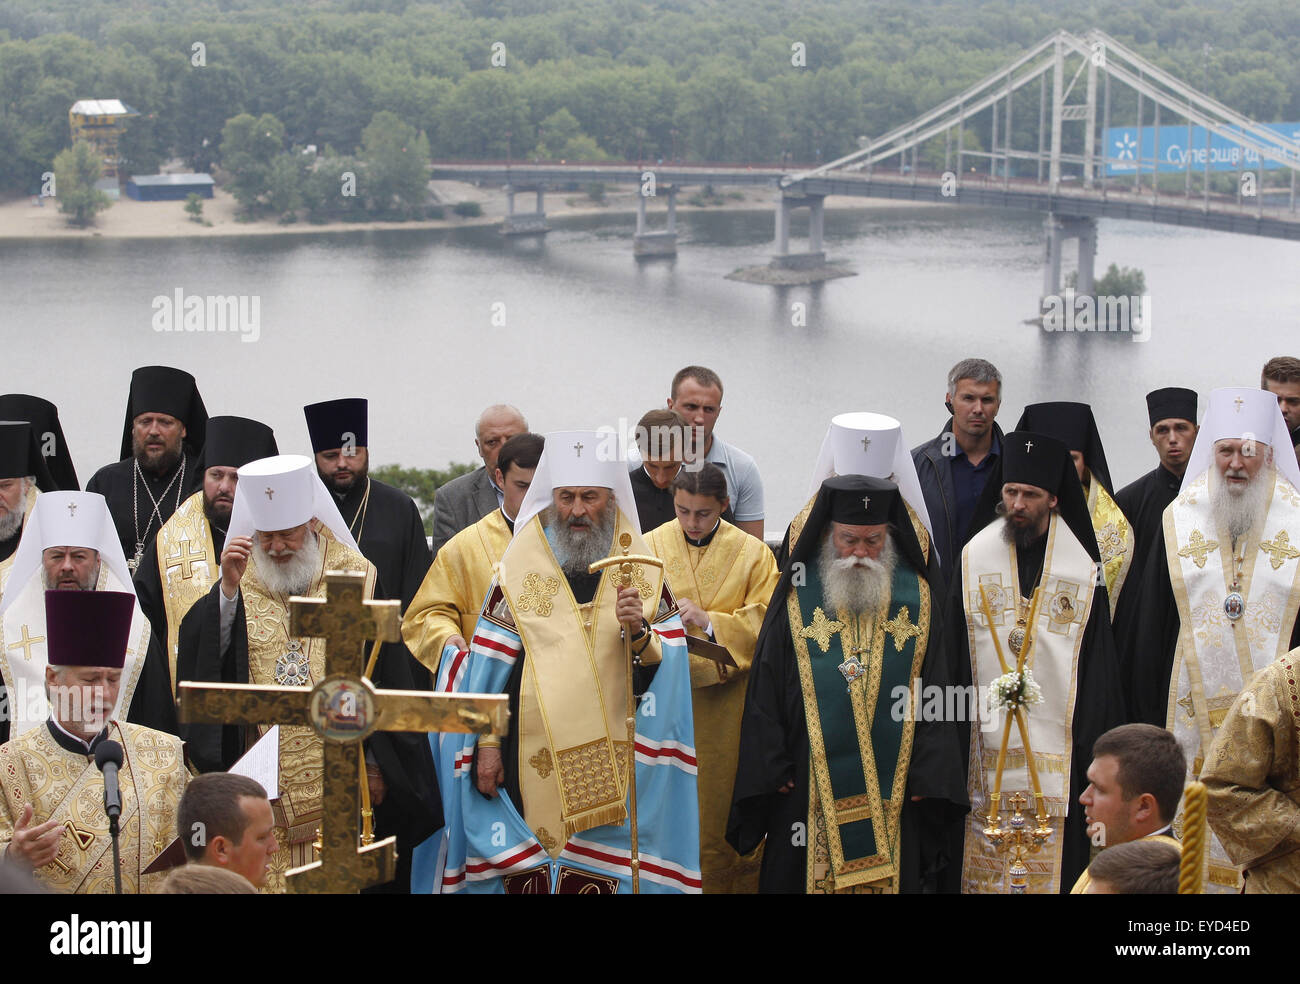 Kiev, Ukraine. 27th July, 2015. Priests from the Ukrainian Orthodox Church of Moscow Patriarchate in a prayer service marking the 1000th anniversary of the Repose of Vladimir the Great at St. Vladimirs Hill in Kiev, Ukraine, 27 July 2015. The Grand Prince of Kiev, Vladimir the Great, also known as St. Vladimir, Vladimir the Baptizer of Rus and Vladimir the Red Sun, was the first Christian ruler in the Kievan Rus who christianized the region. Orthodox believers will mark the 1027th anniversary of Kievan Rus Christianization on 28 July. © Serg Glovny/ZUMA Wire/Alamy Live News Stock Photo